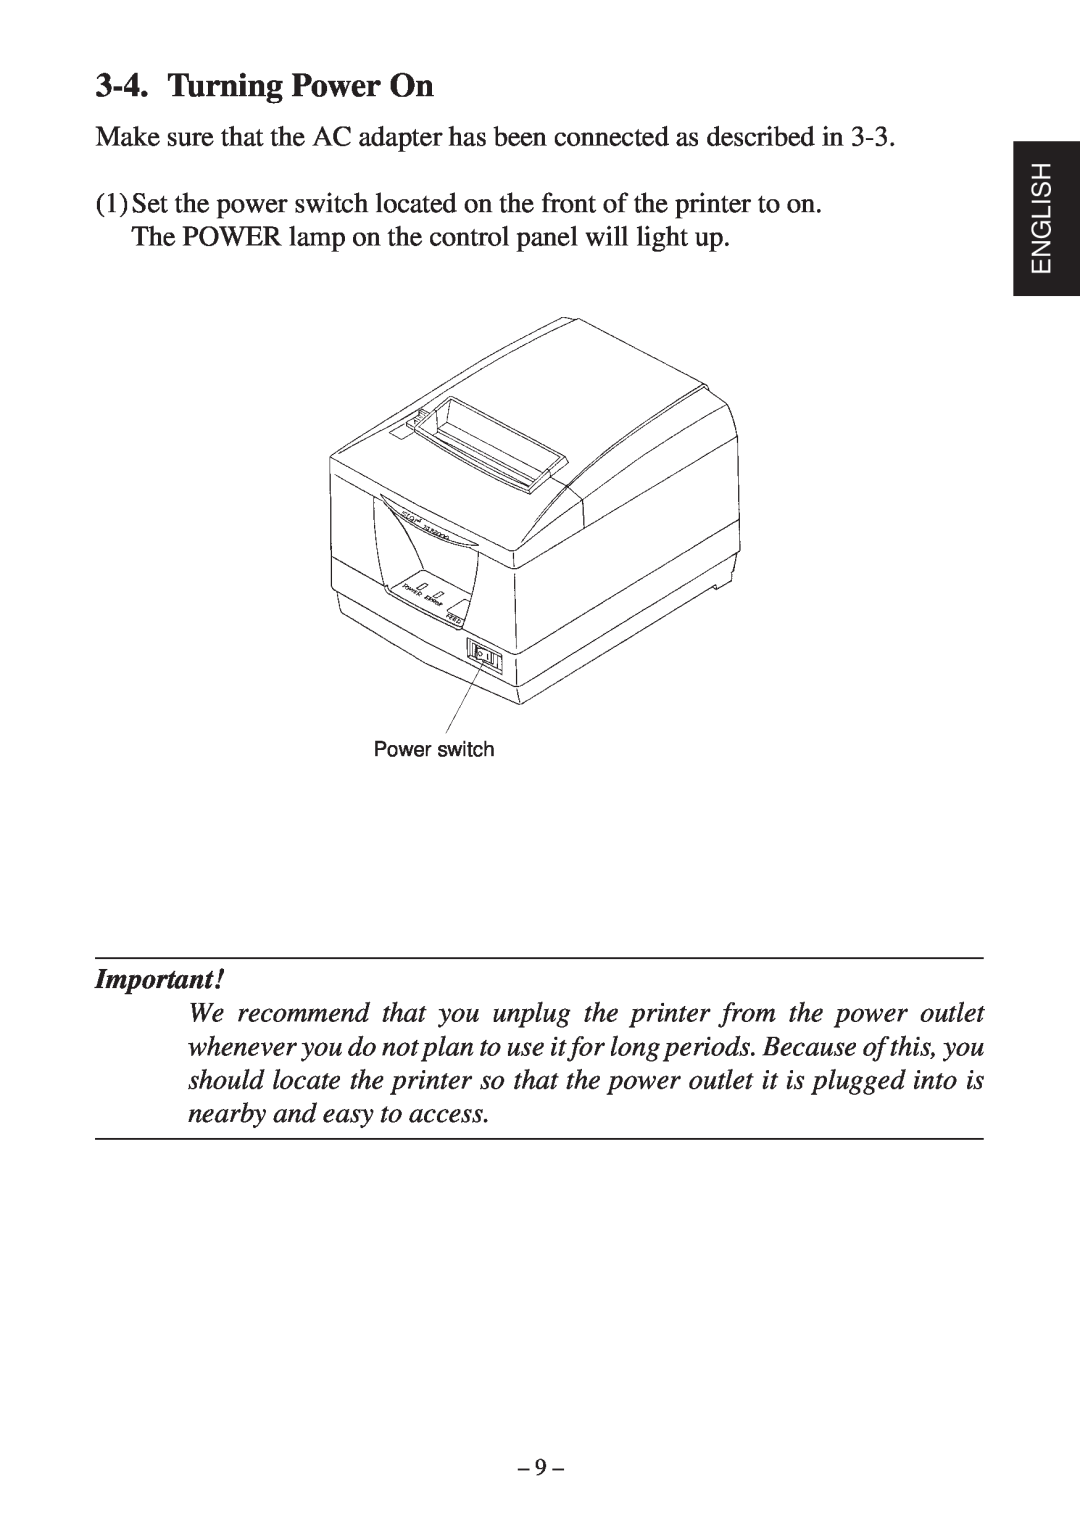 Star Micronics TSP2000 user manual Turning Power On, Make sure that the AC adapter has been connected as described in 